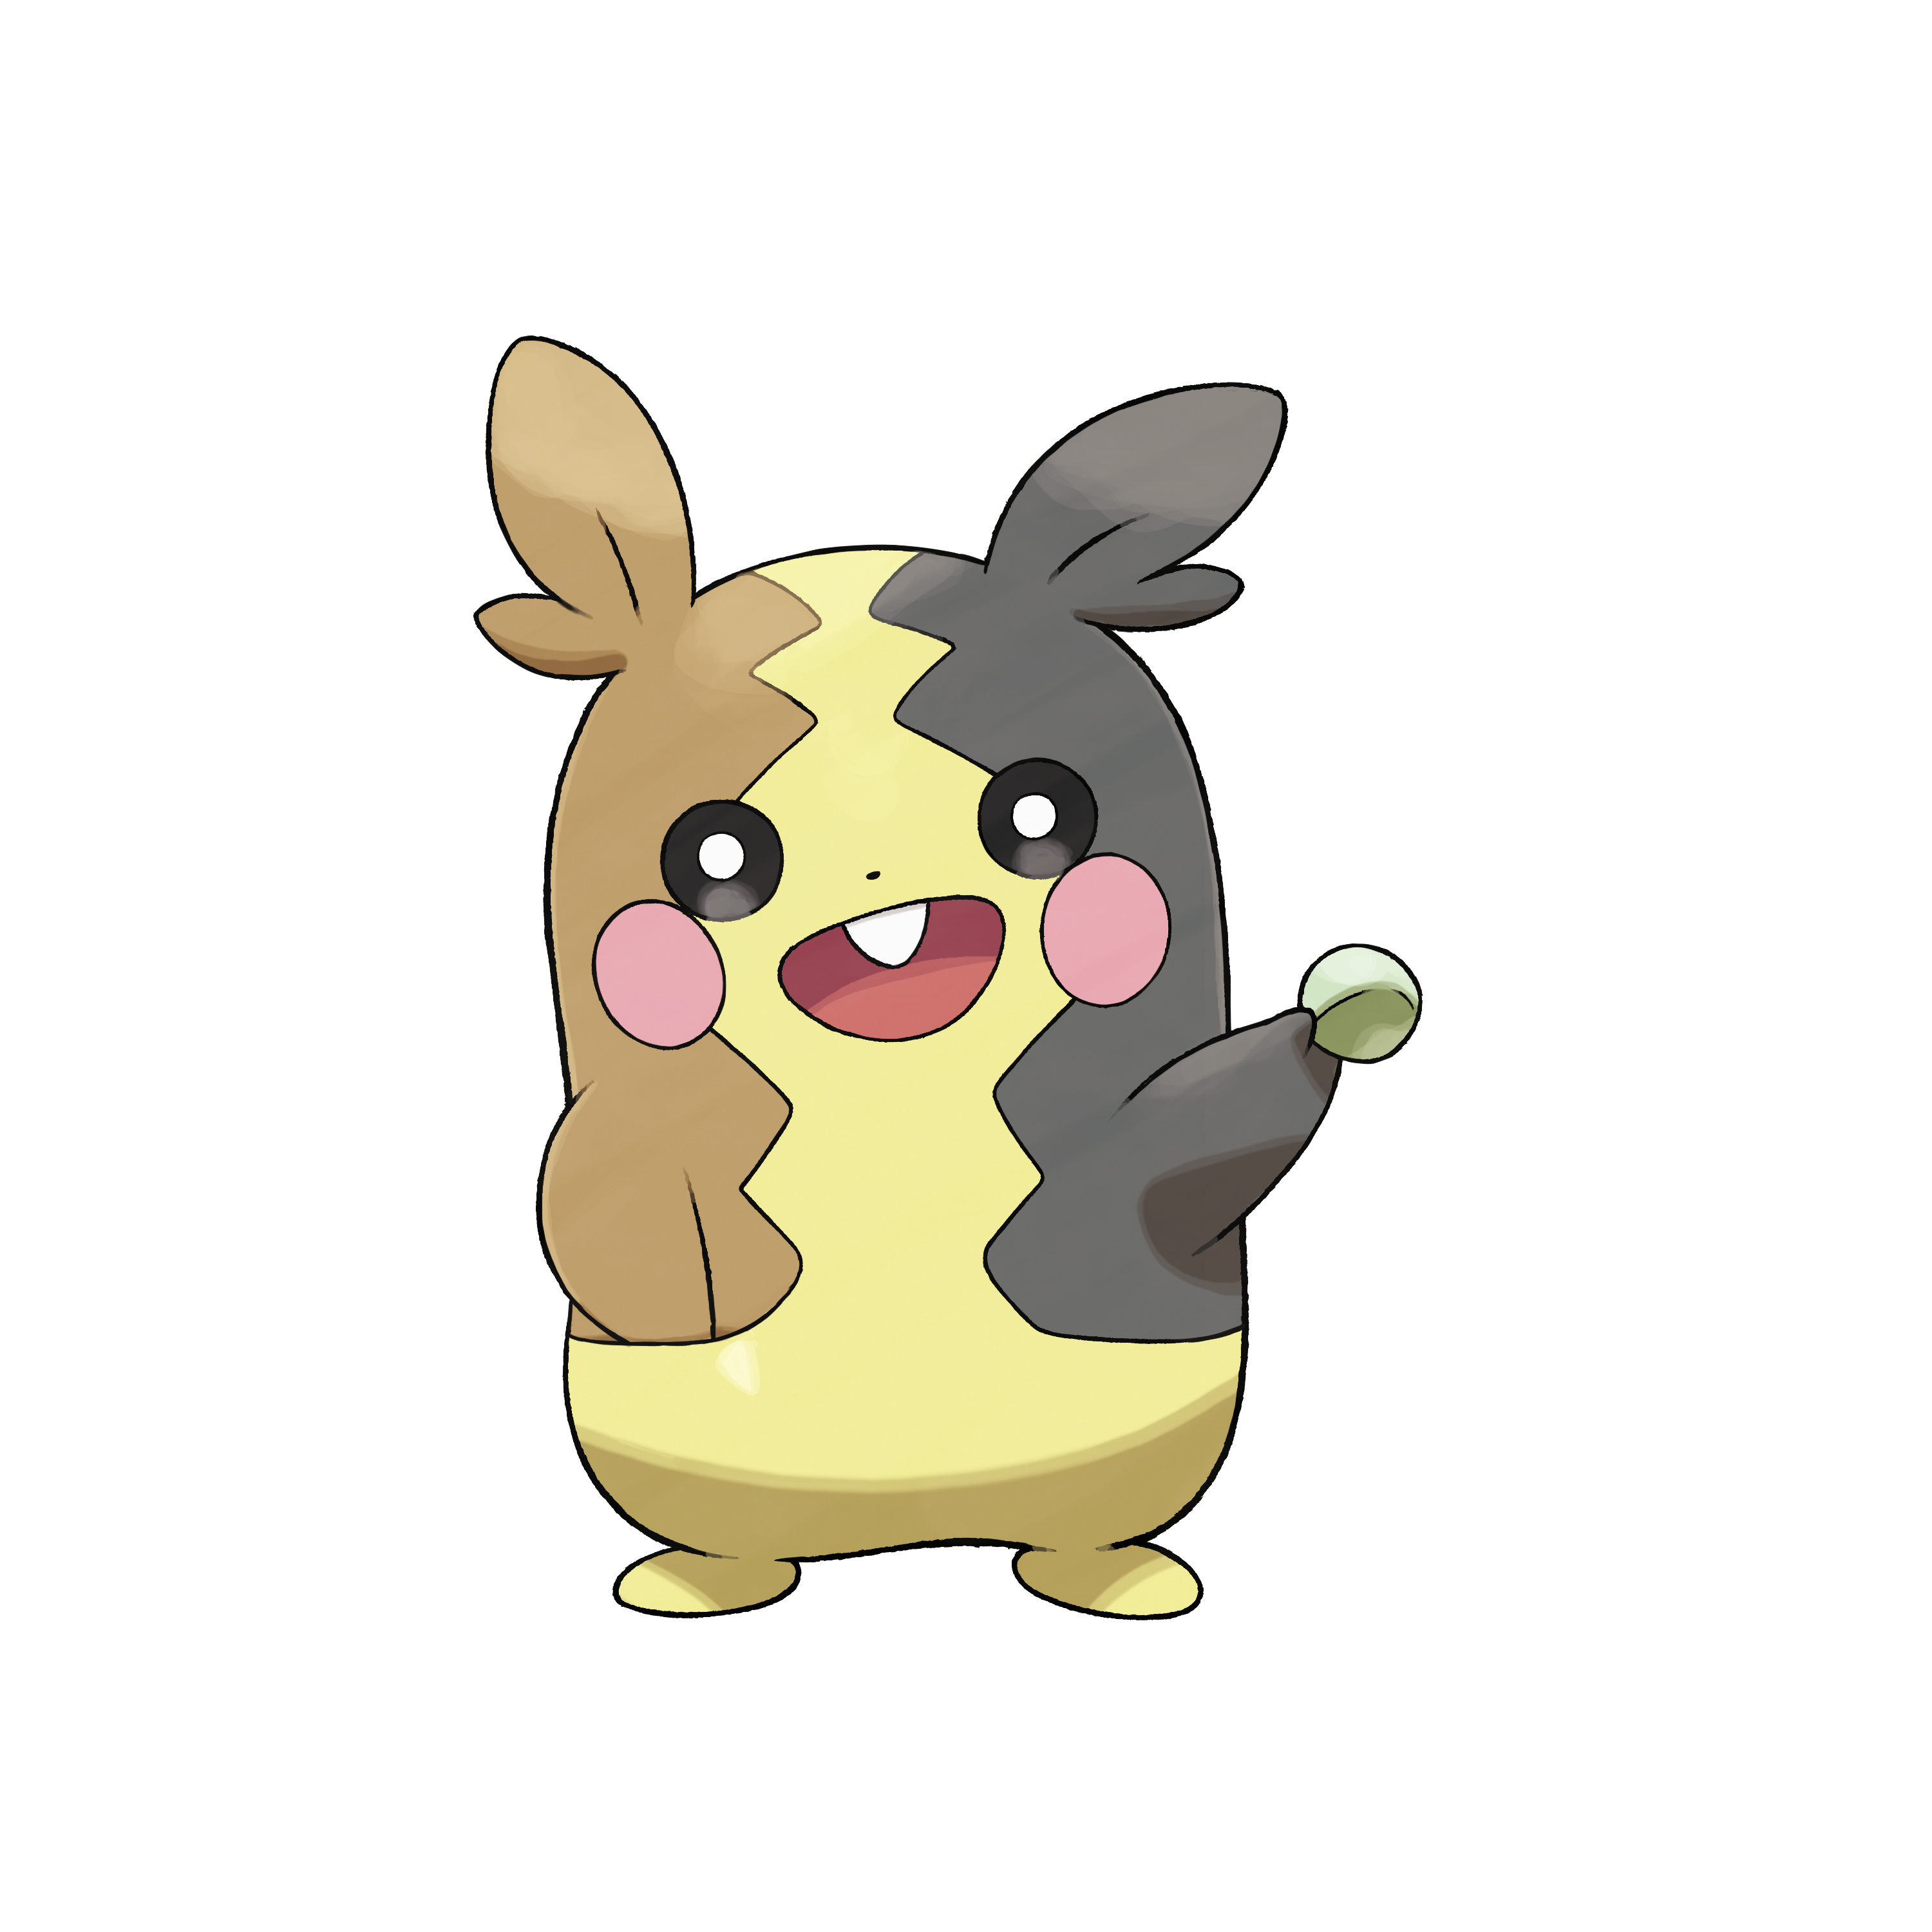 SOSNH1995 on X: Morpeko is known as the Two-Sided Pokemon and for good  reason. Standing at 1' and weighing 6.6 lbs, it seems Morpeko is the  Pikachu of this region. It has